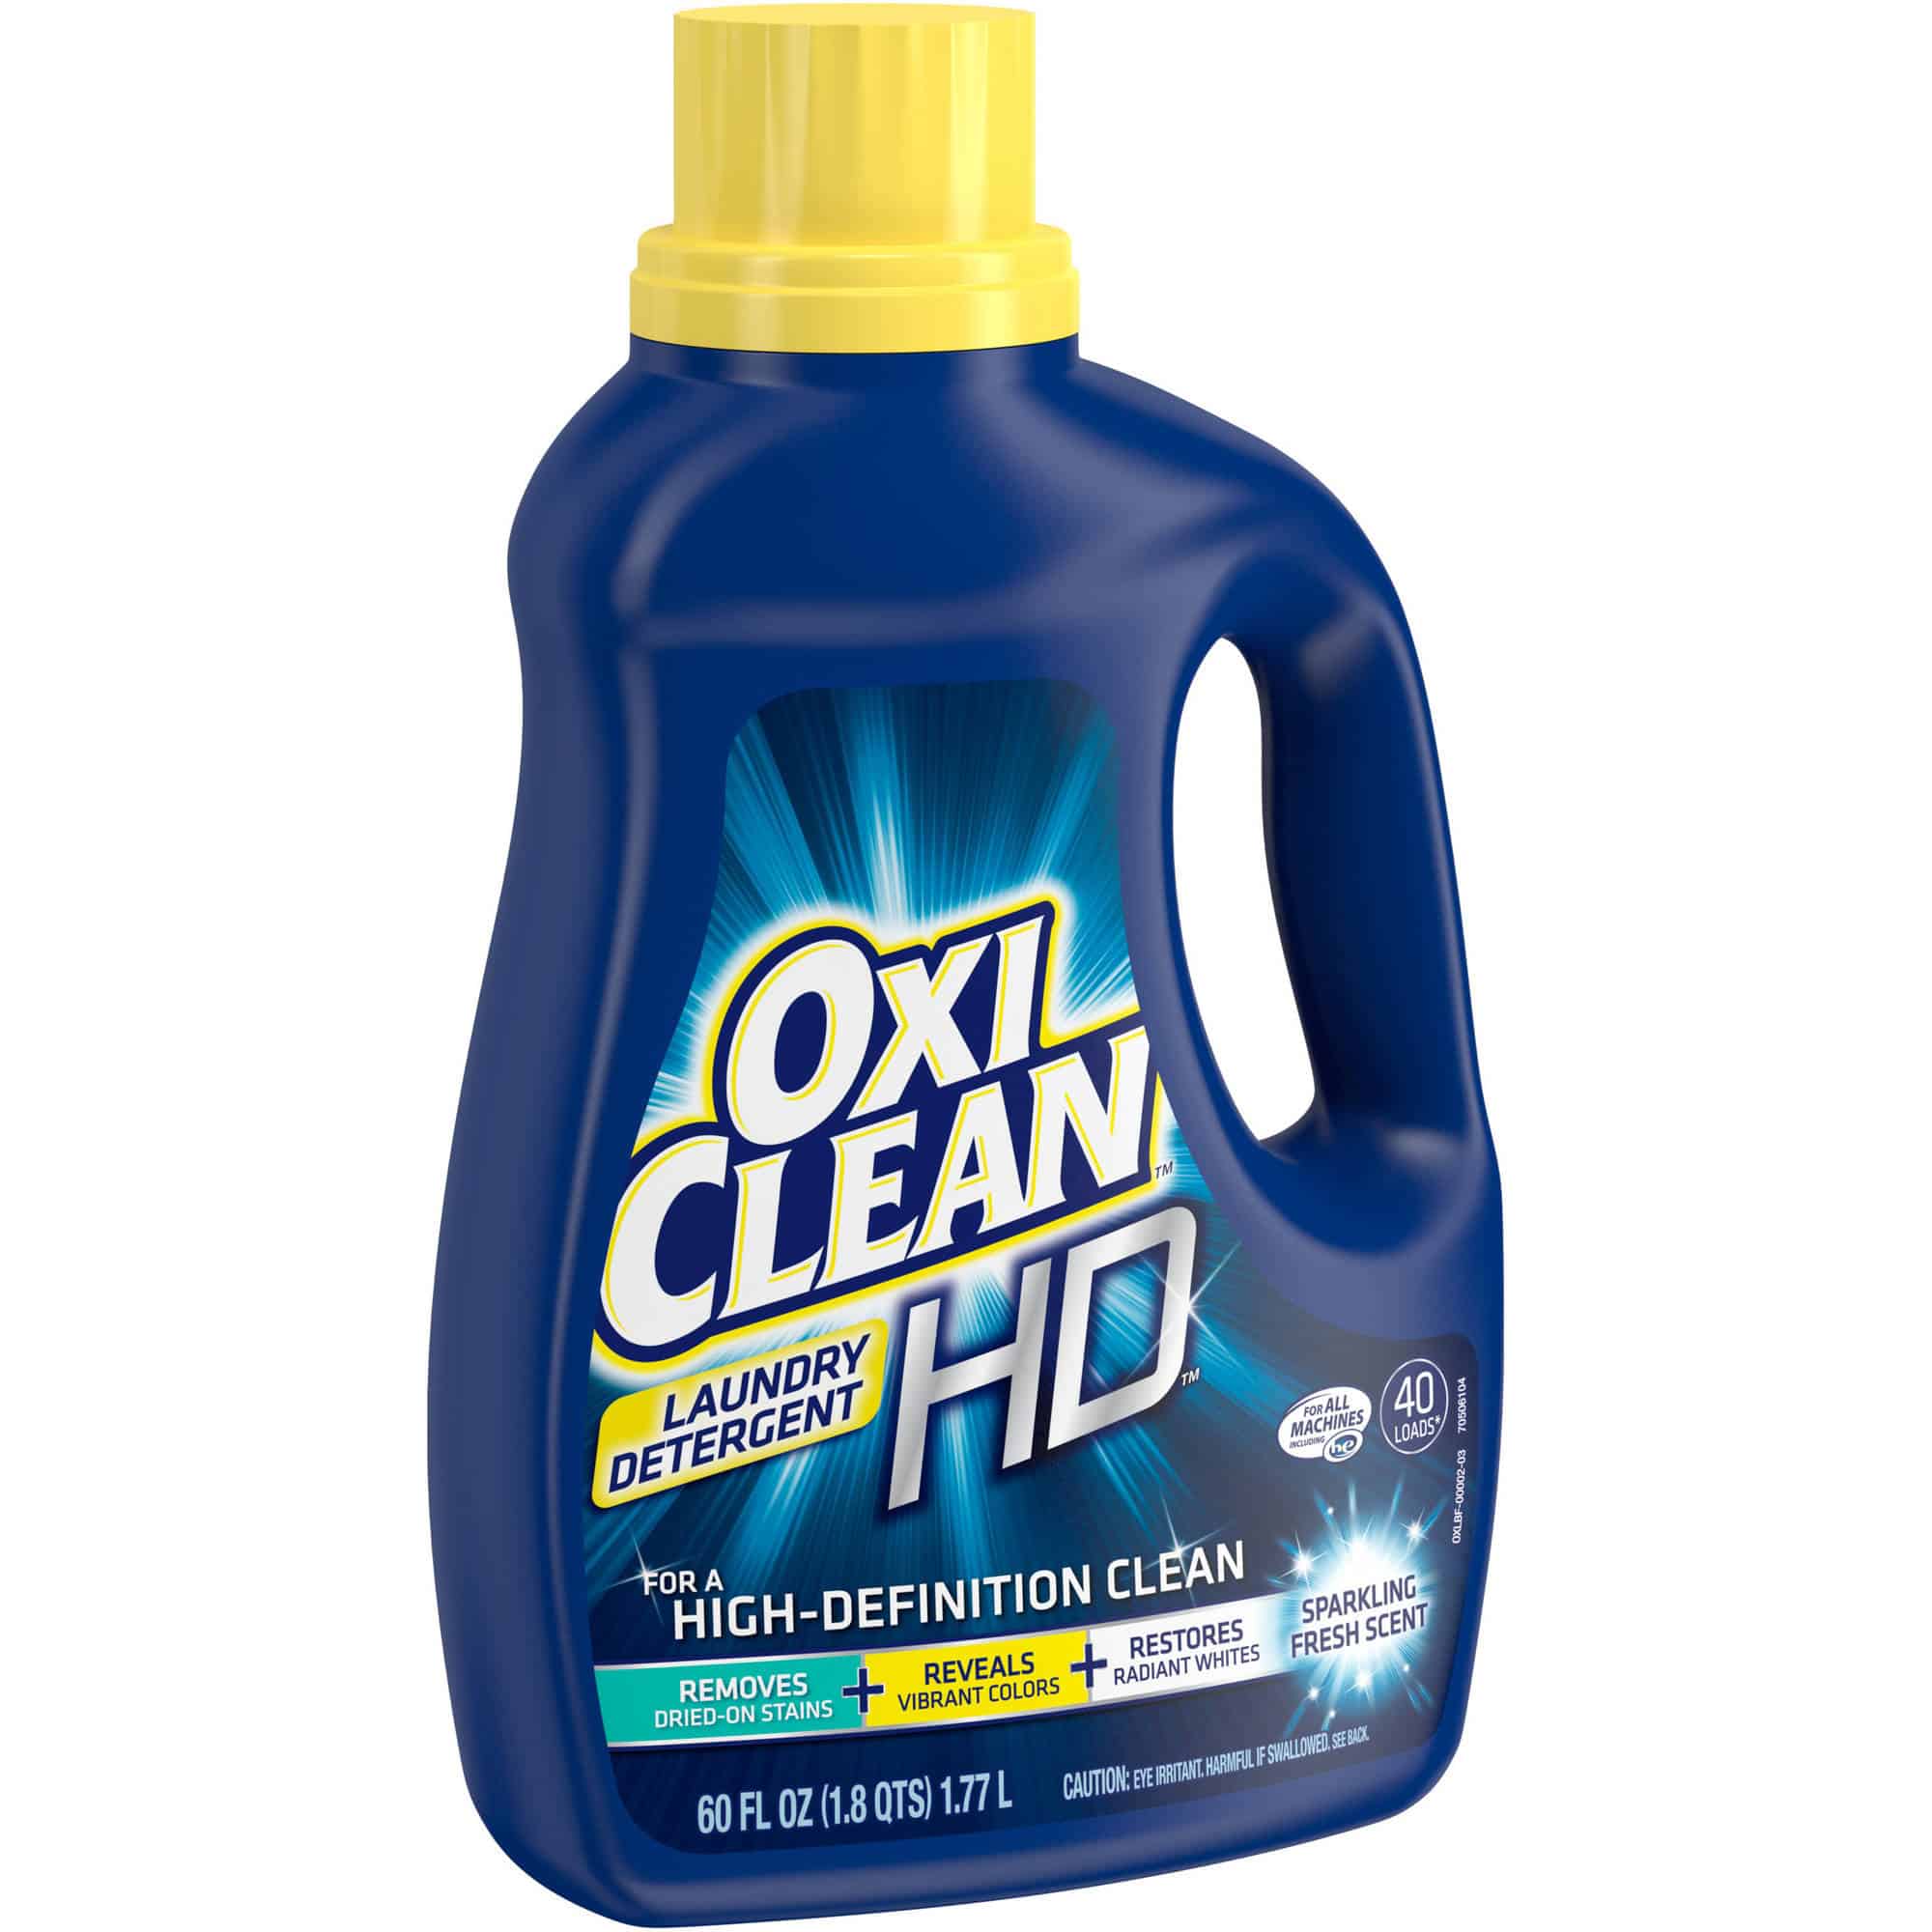 rite-aid-oxiclean-laundry-detergent-only-0-99-starting-6-10-ftm